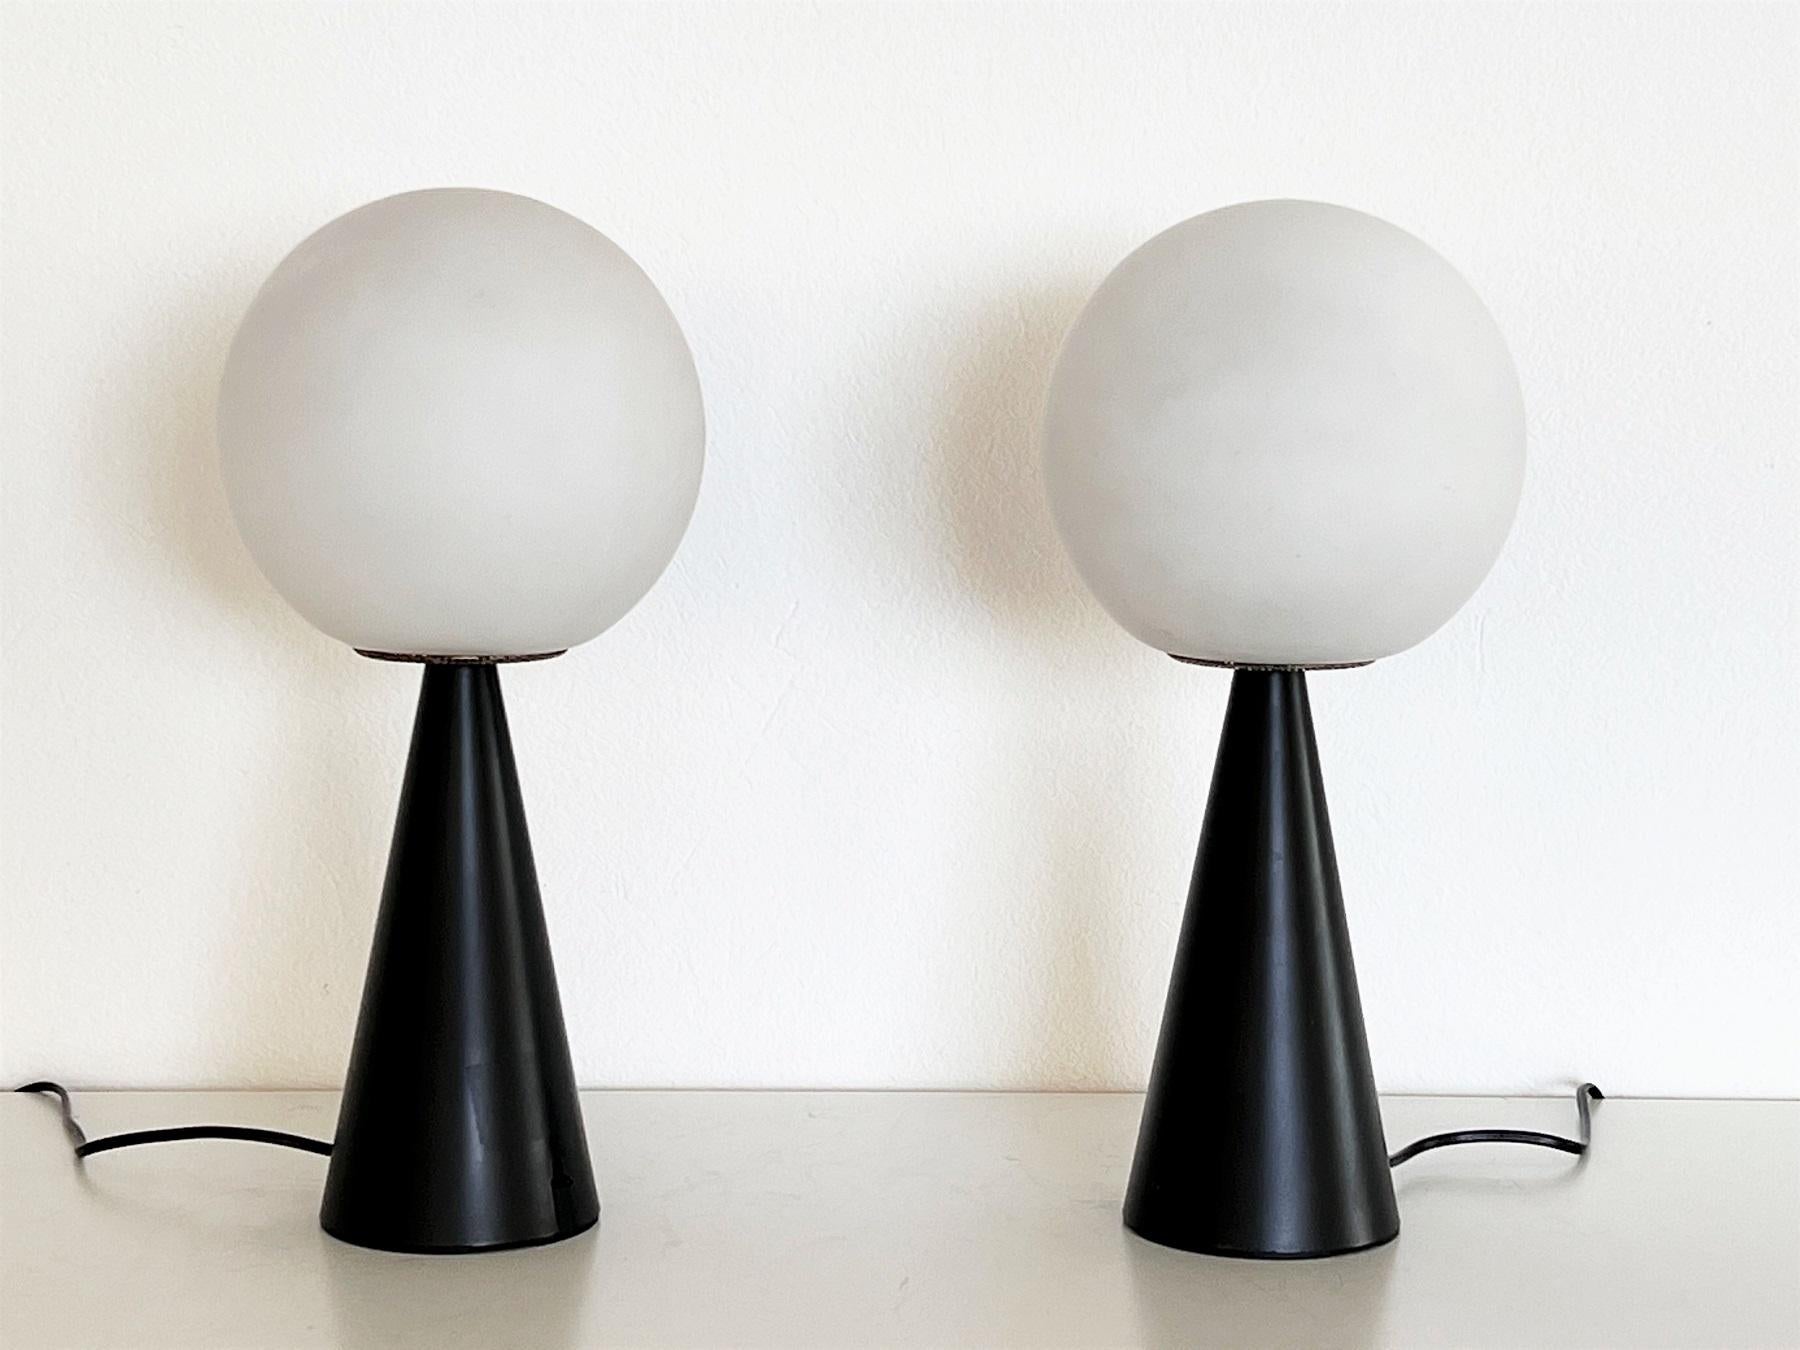 Wonderful pair of Italian Design table lamps, manufactured in the 1980s (Space Age era) by Tre Ci Luce, design attributed to Cesare Lacca. There are original manufacturers label inside the lamp.
Reminds to the design of 